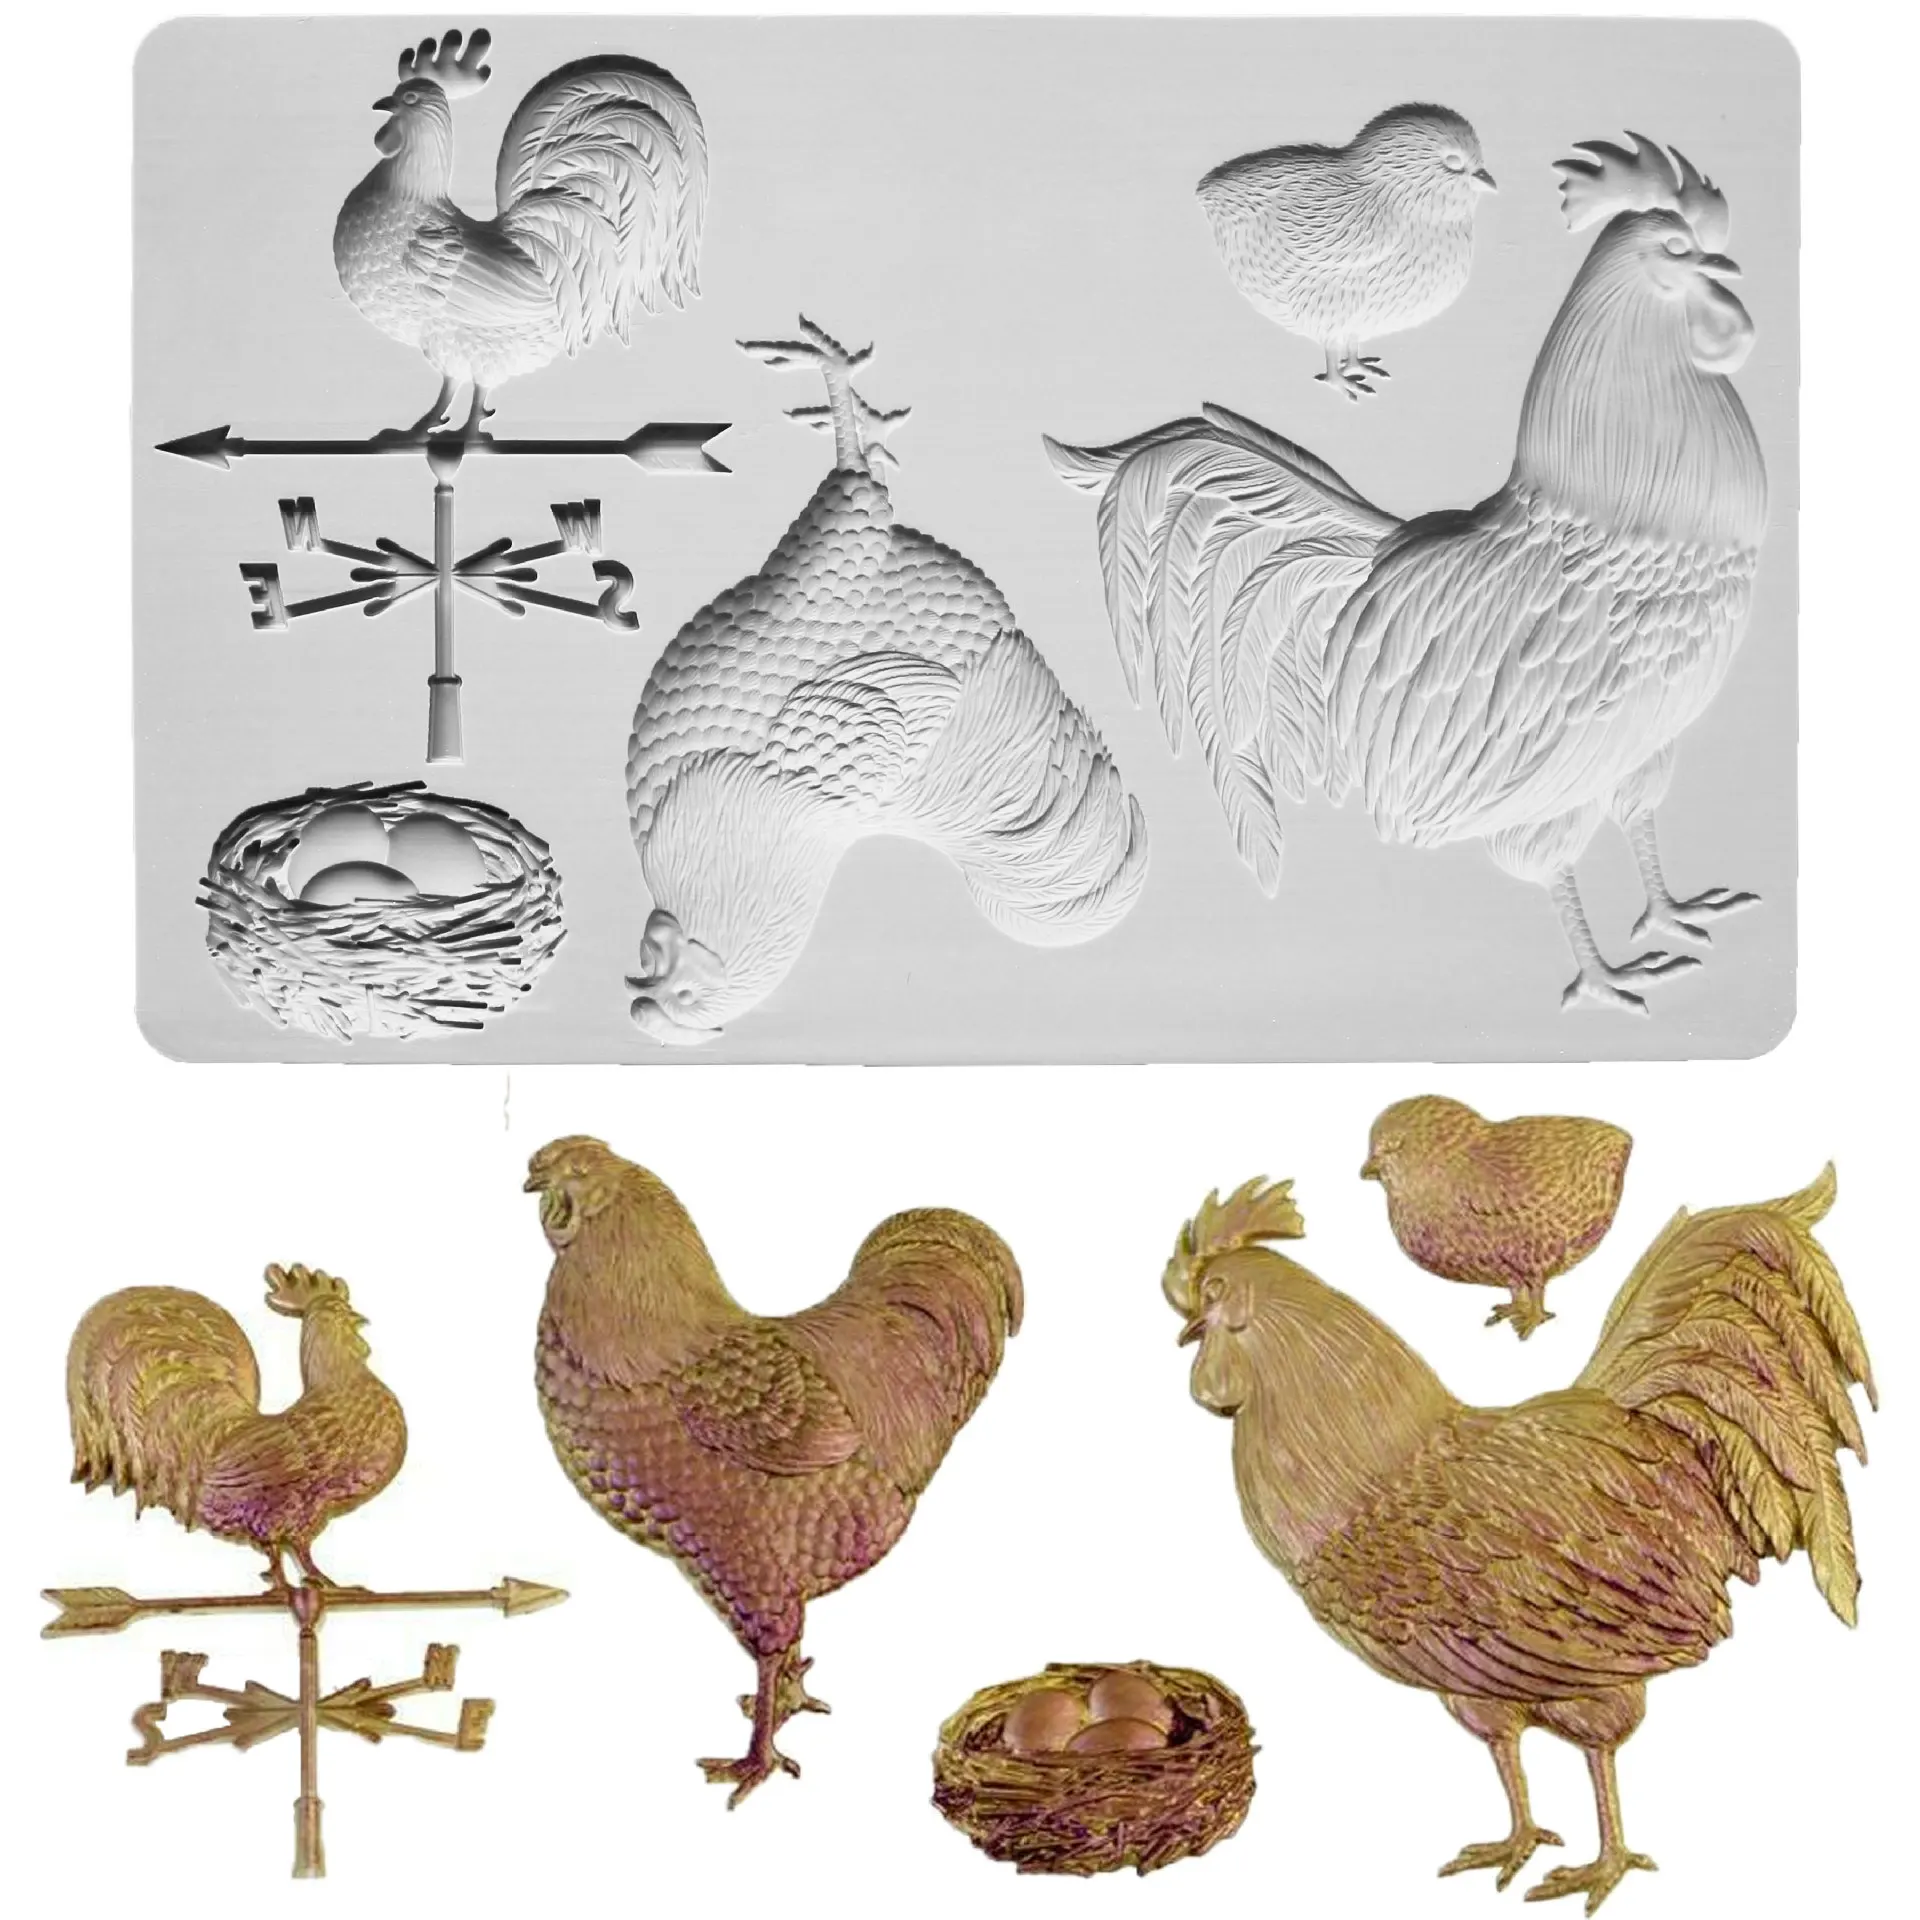 New Baking Tools Animal Farm Chicken Coop Chocolate Mold Fondant Chocolate Cake Silicone Mold Cake Decorating Tools